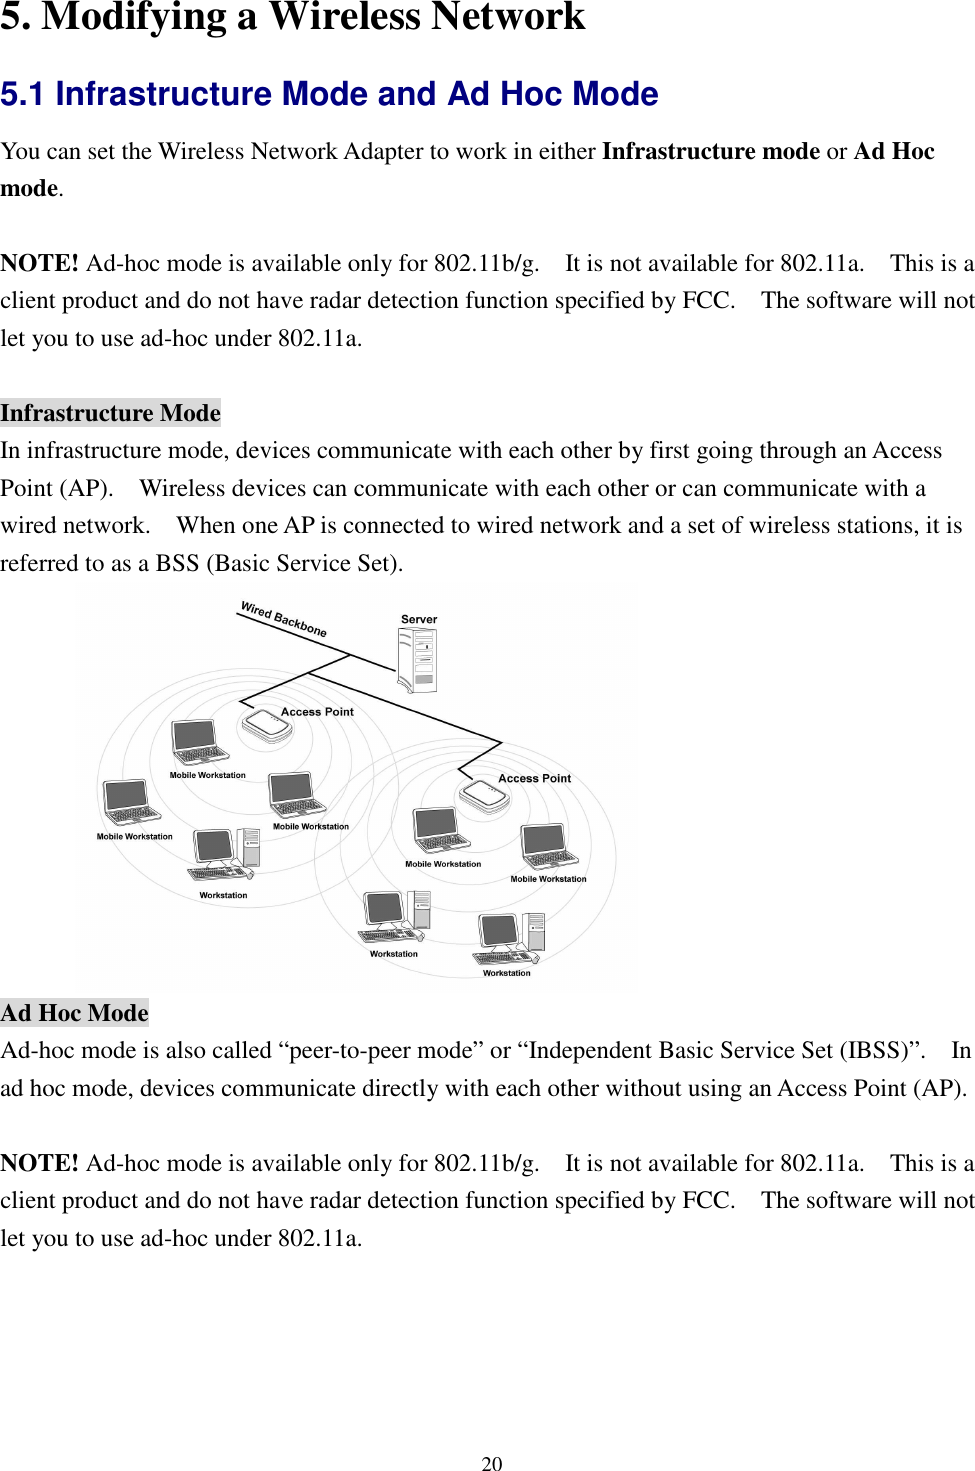   205. Modifying a Wireless Network 5.1 Infrastructure Mode and Ad Hoc Mode   You can set the Wireless Network Adapter to work in either Infrastructure mode or Ad Hoc mode.  NOTE! Ad-hoc mode is available only for 802.11b/g.    It is not available for 802.11a.    This is a client product and do not have radar detection function specified by FCC.    The software will not let you to use ad-hoc under 802.11a.  Infrastructure Mode In infrastructure mode, devices communicate with each other by first going through an Access Point (AP).    Wireless devices can communicate with each other or can communicate with a wired network.    When one AP is connected to wired network and a set of wireless stations, it is referred to as a BSS (Basic Service Set).  Ad Hoc Mode Ad-hoc mode is also called “peer-to-peer mode” or “Independent Basic Service Set (IBSS)”.    In ad hoc mode, devices communicate directly with each other without using an Access Point (AP).  NOTE! Ad-hoc mode is available only for 802.11b/g.    It is not available for 802.11a.    This is a client product and do not have radar detection function specified by FCC.    The software will not let you to use ad-hoc under 802.11a. 